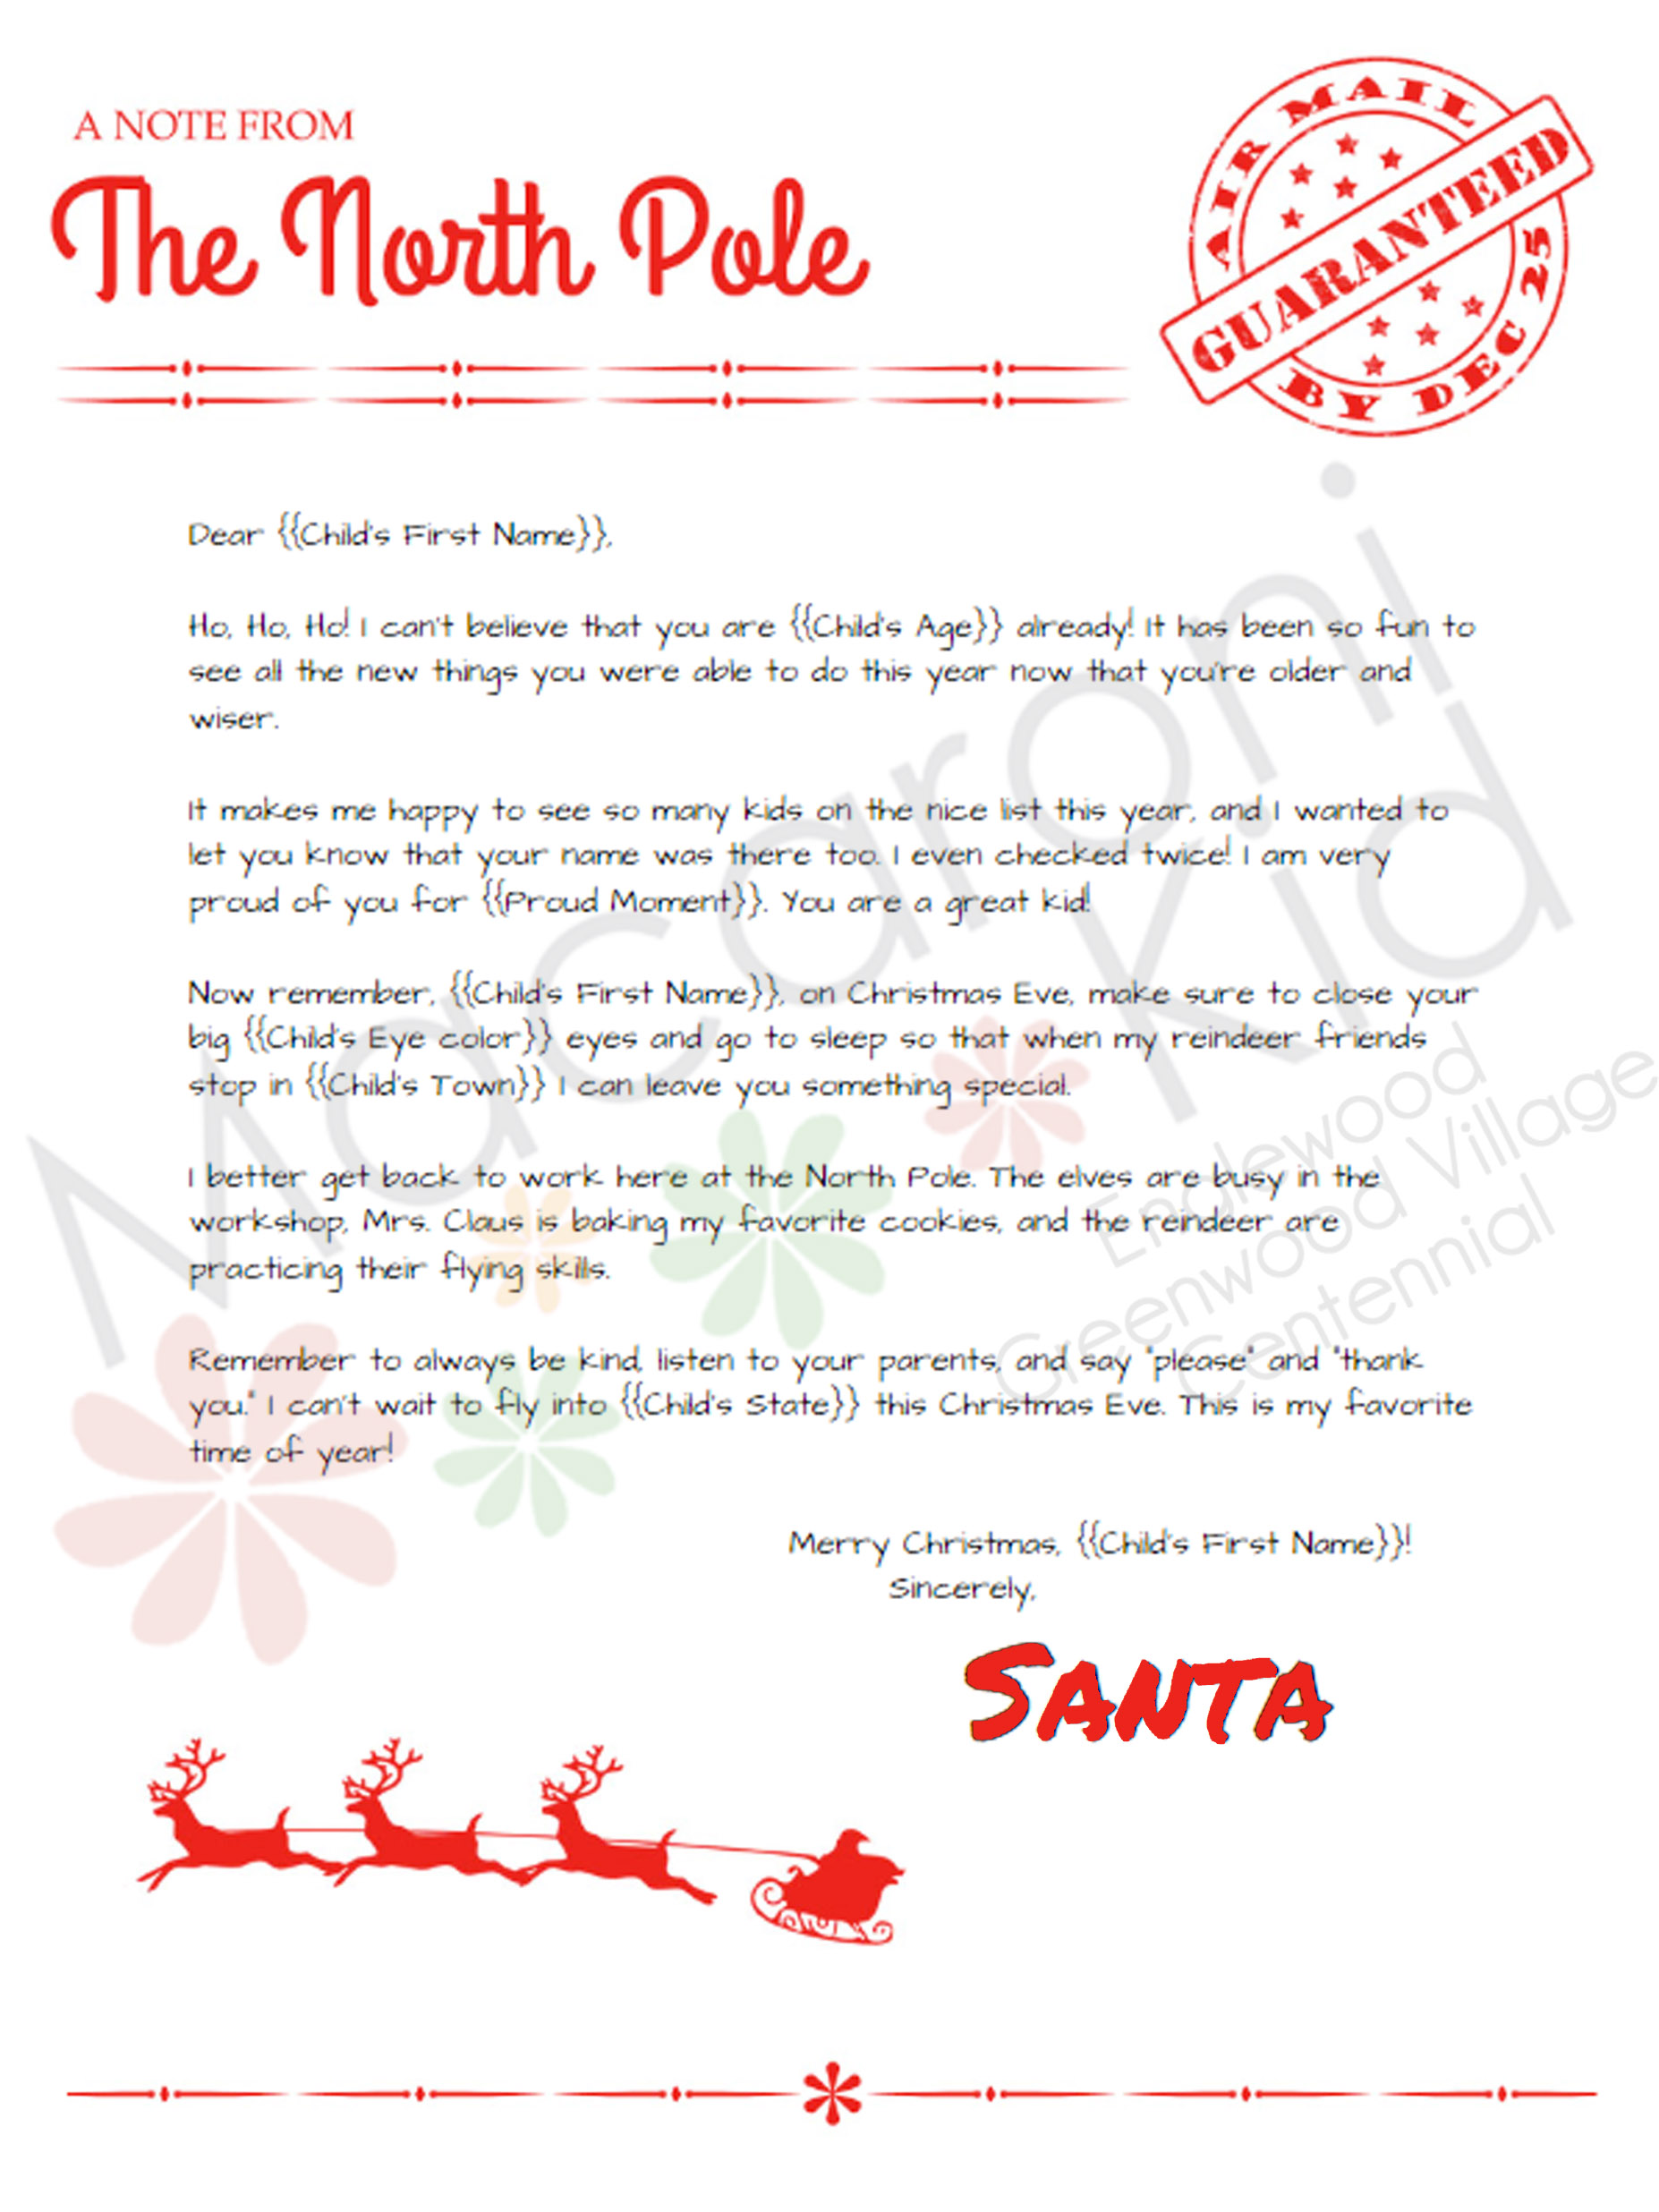 receive-a-personalized-letter-from-santa-claus-macaroni-kid-englewood-greenwood-village-centennial